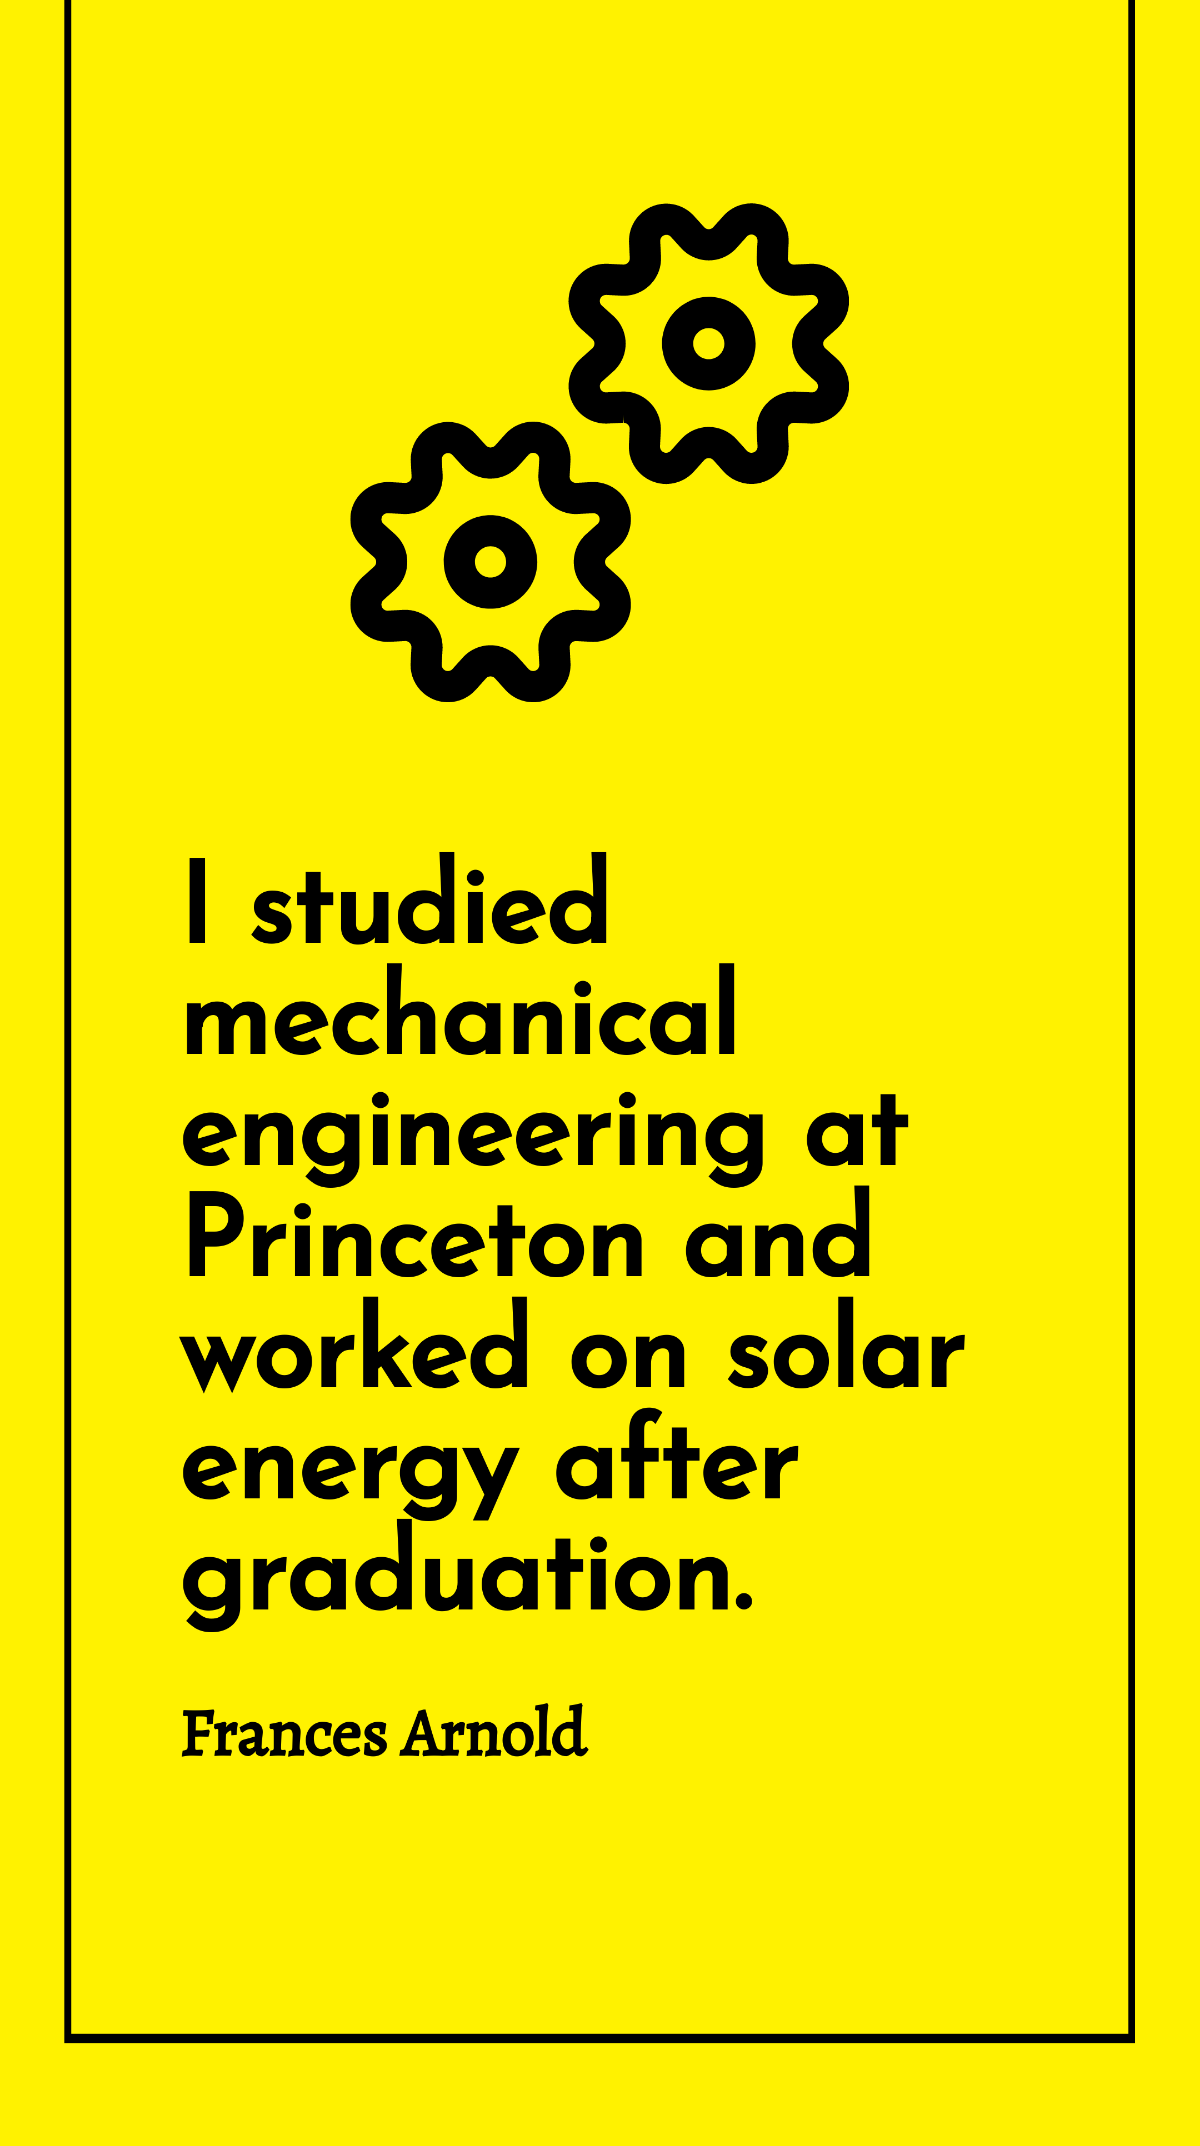 Free Frances Arnold - I studied mechanical engineering at Princeton and worked on solar energy after graduation. Template